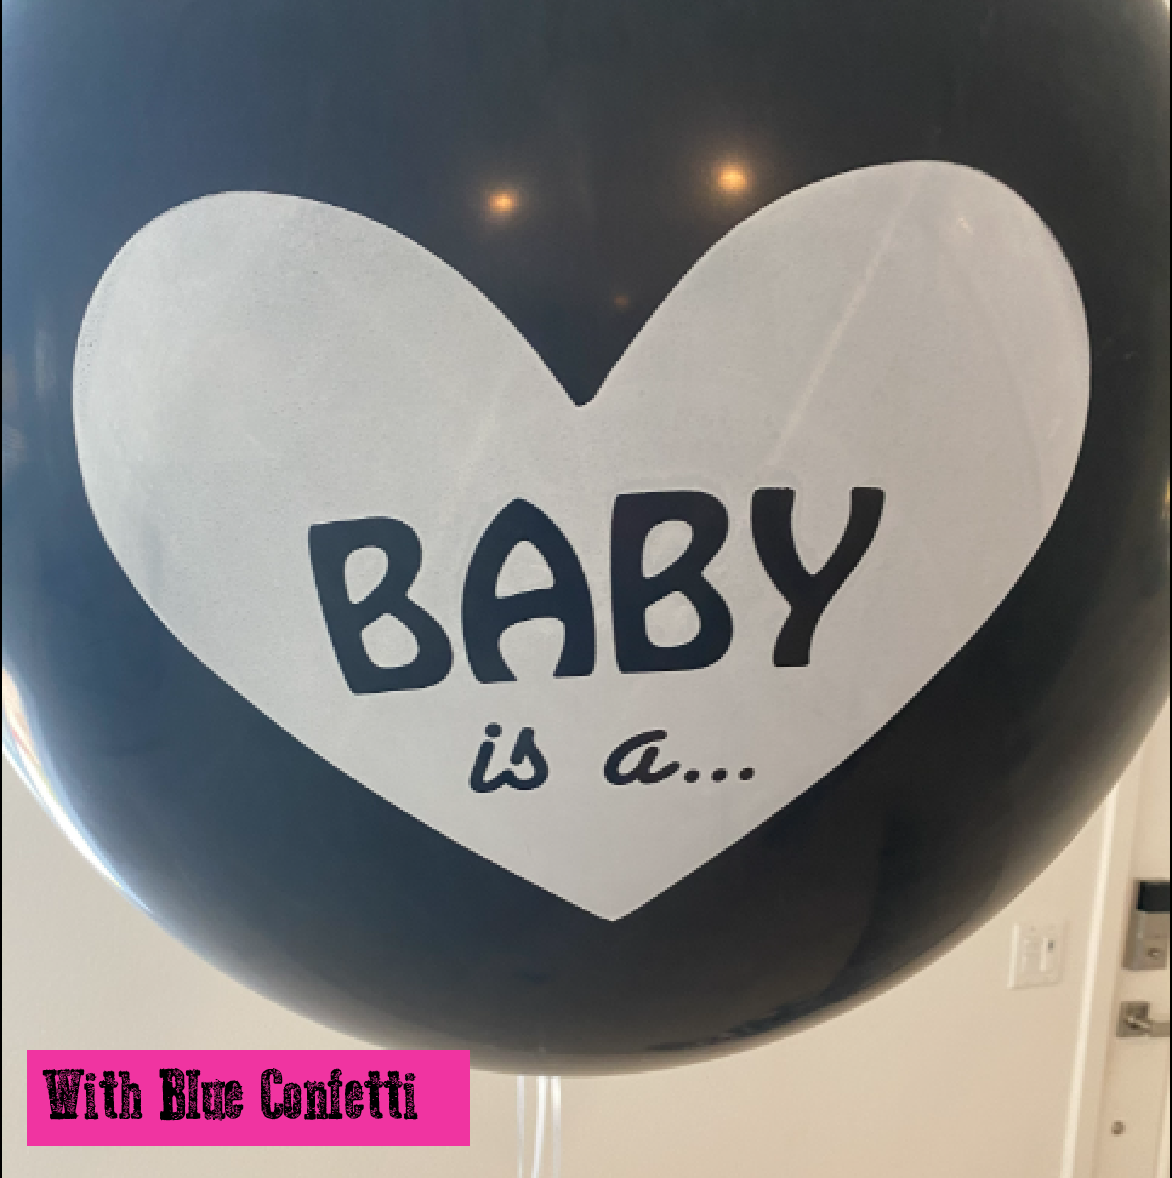 Party Decoration Balloon - Baby Gender Reveal Balloon - Pink Confetti